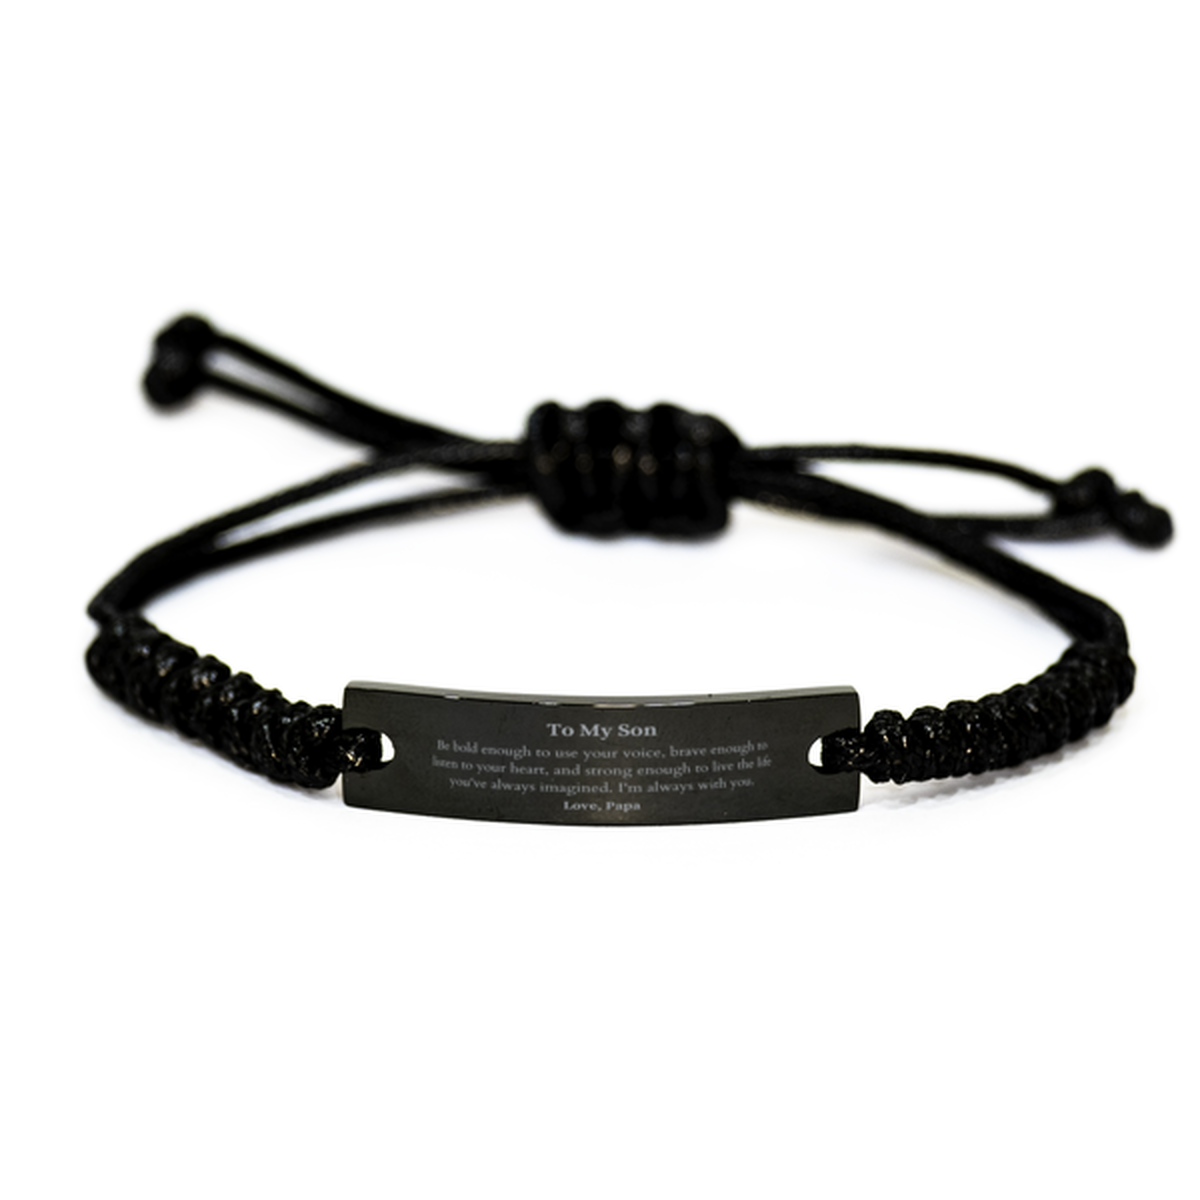 Keepsake Son Black Rope Bracelet Gift Idea Graduation Christmas Birthday Son from Papa, Son Be bold enough to use your voice, brave enough to listen to your heart. Love, Papa